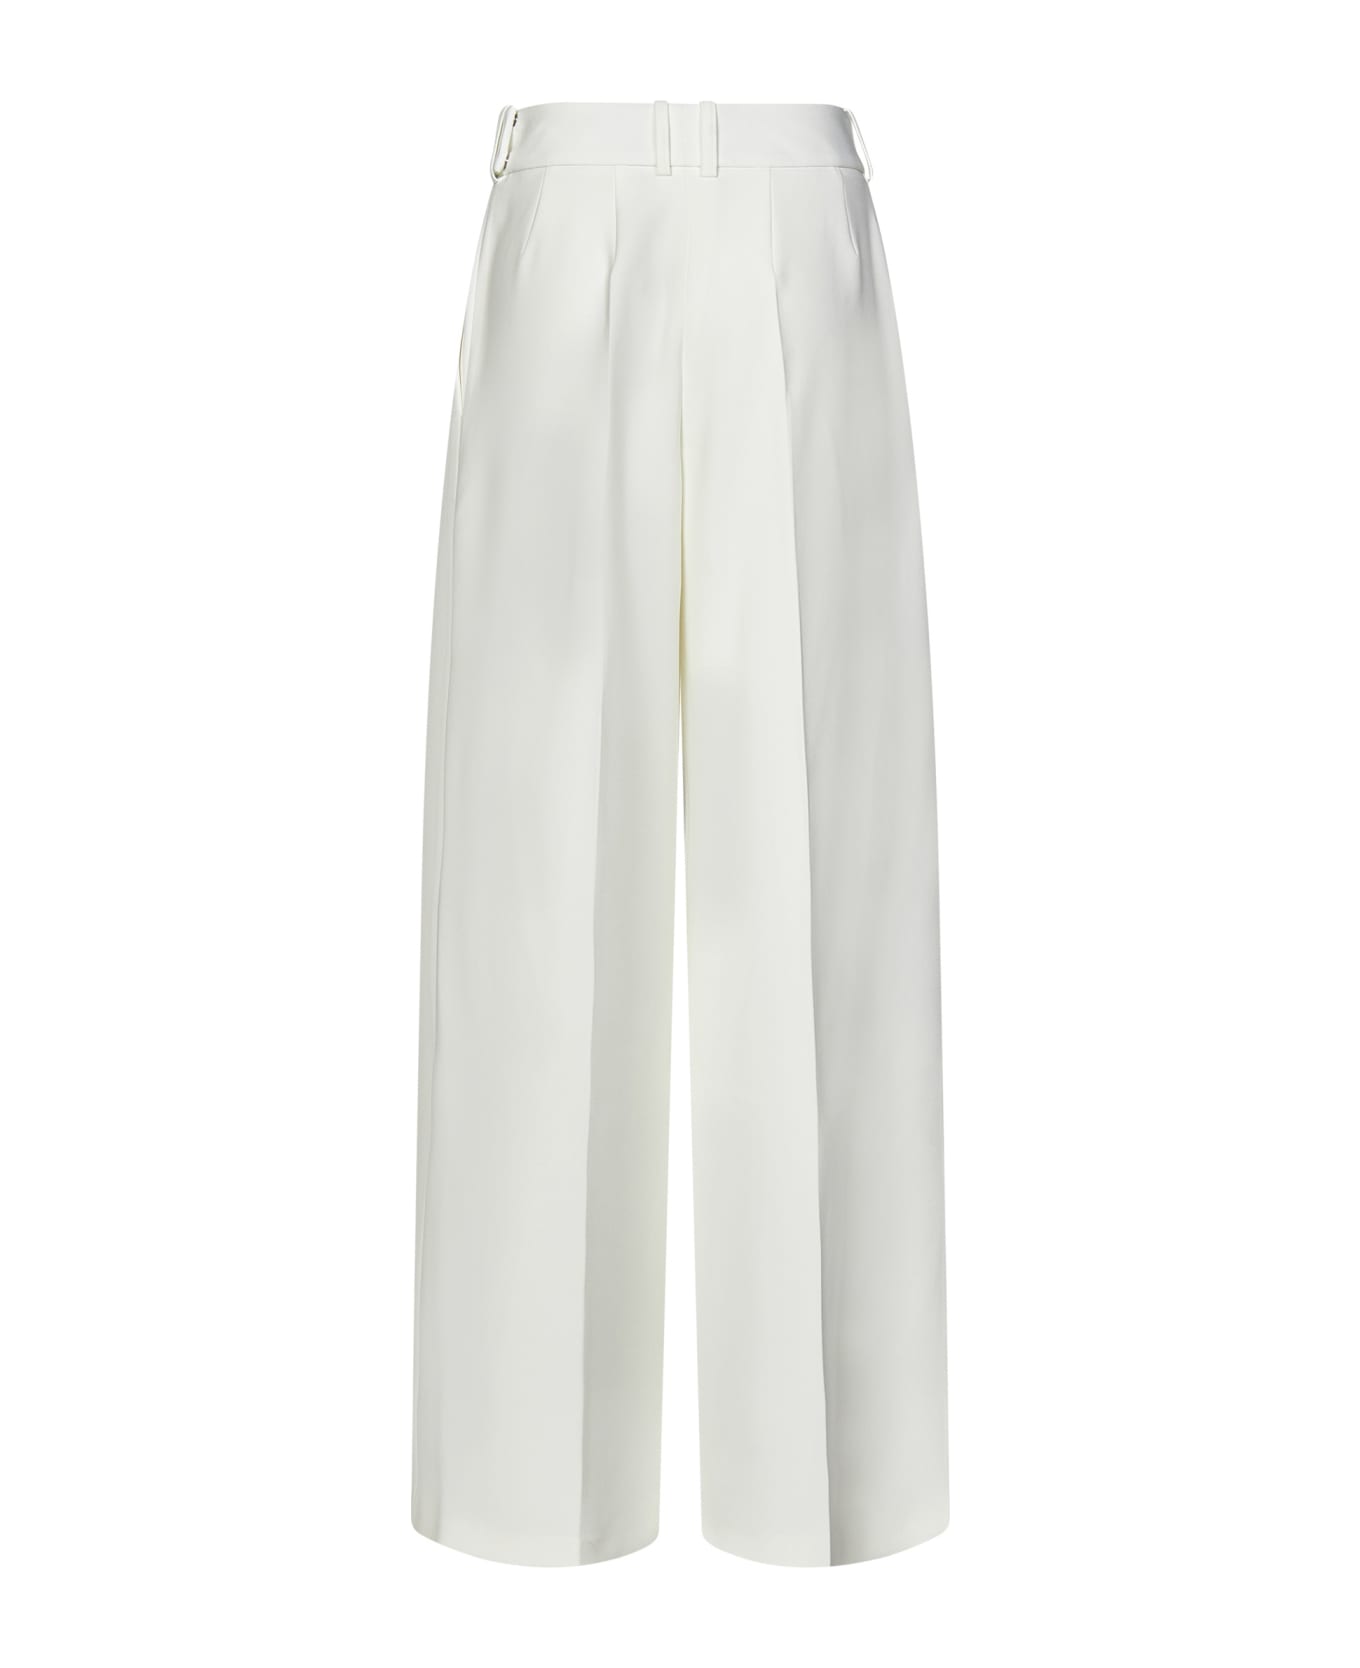 Alexandre Vauthier Trousers - White ボトムス